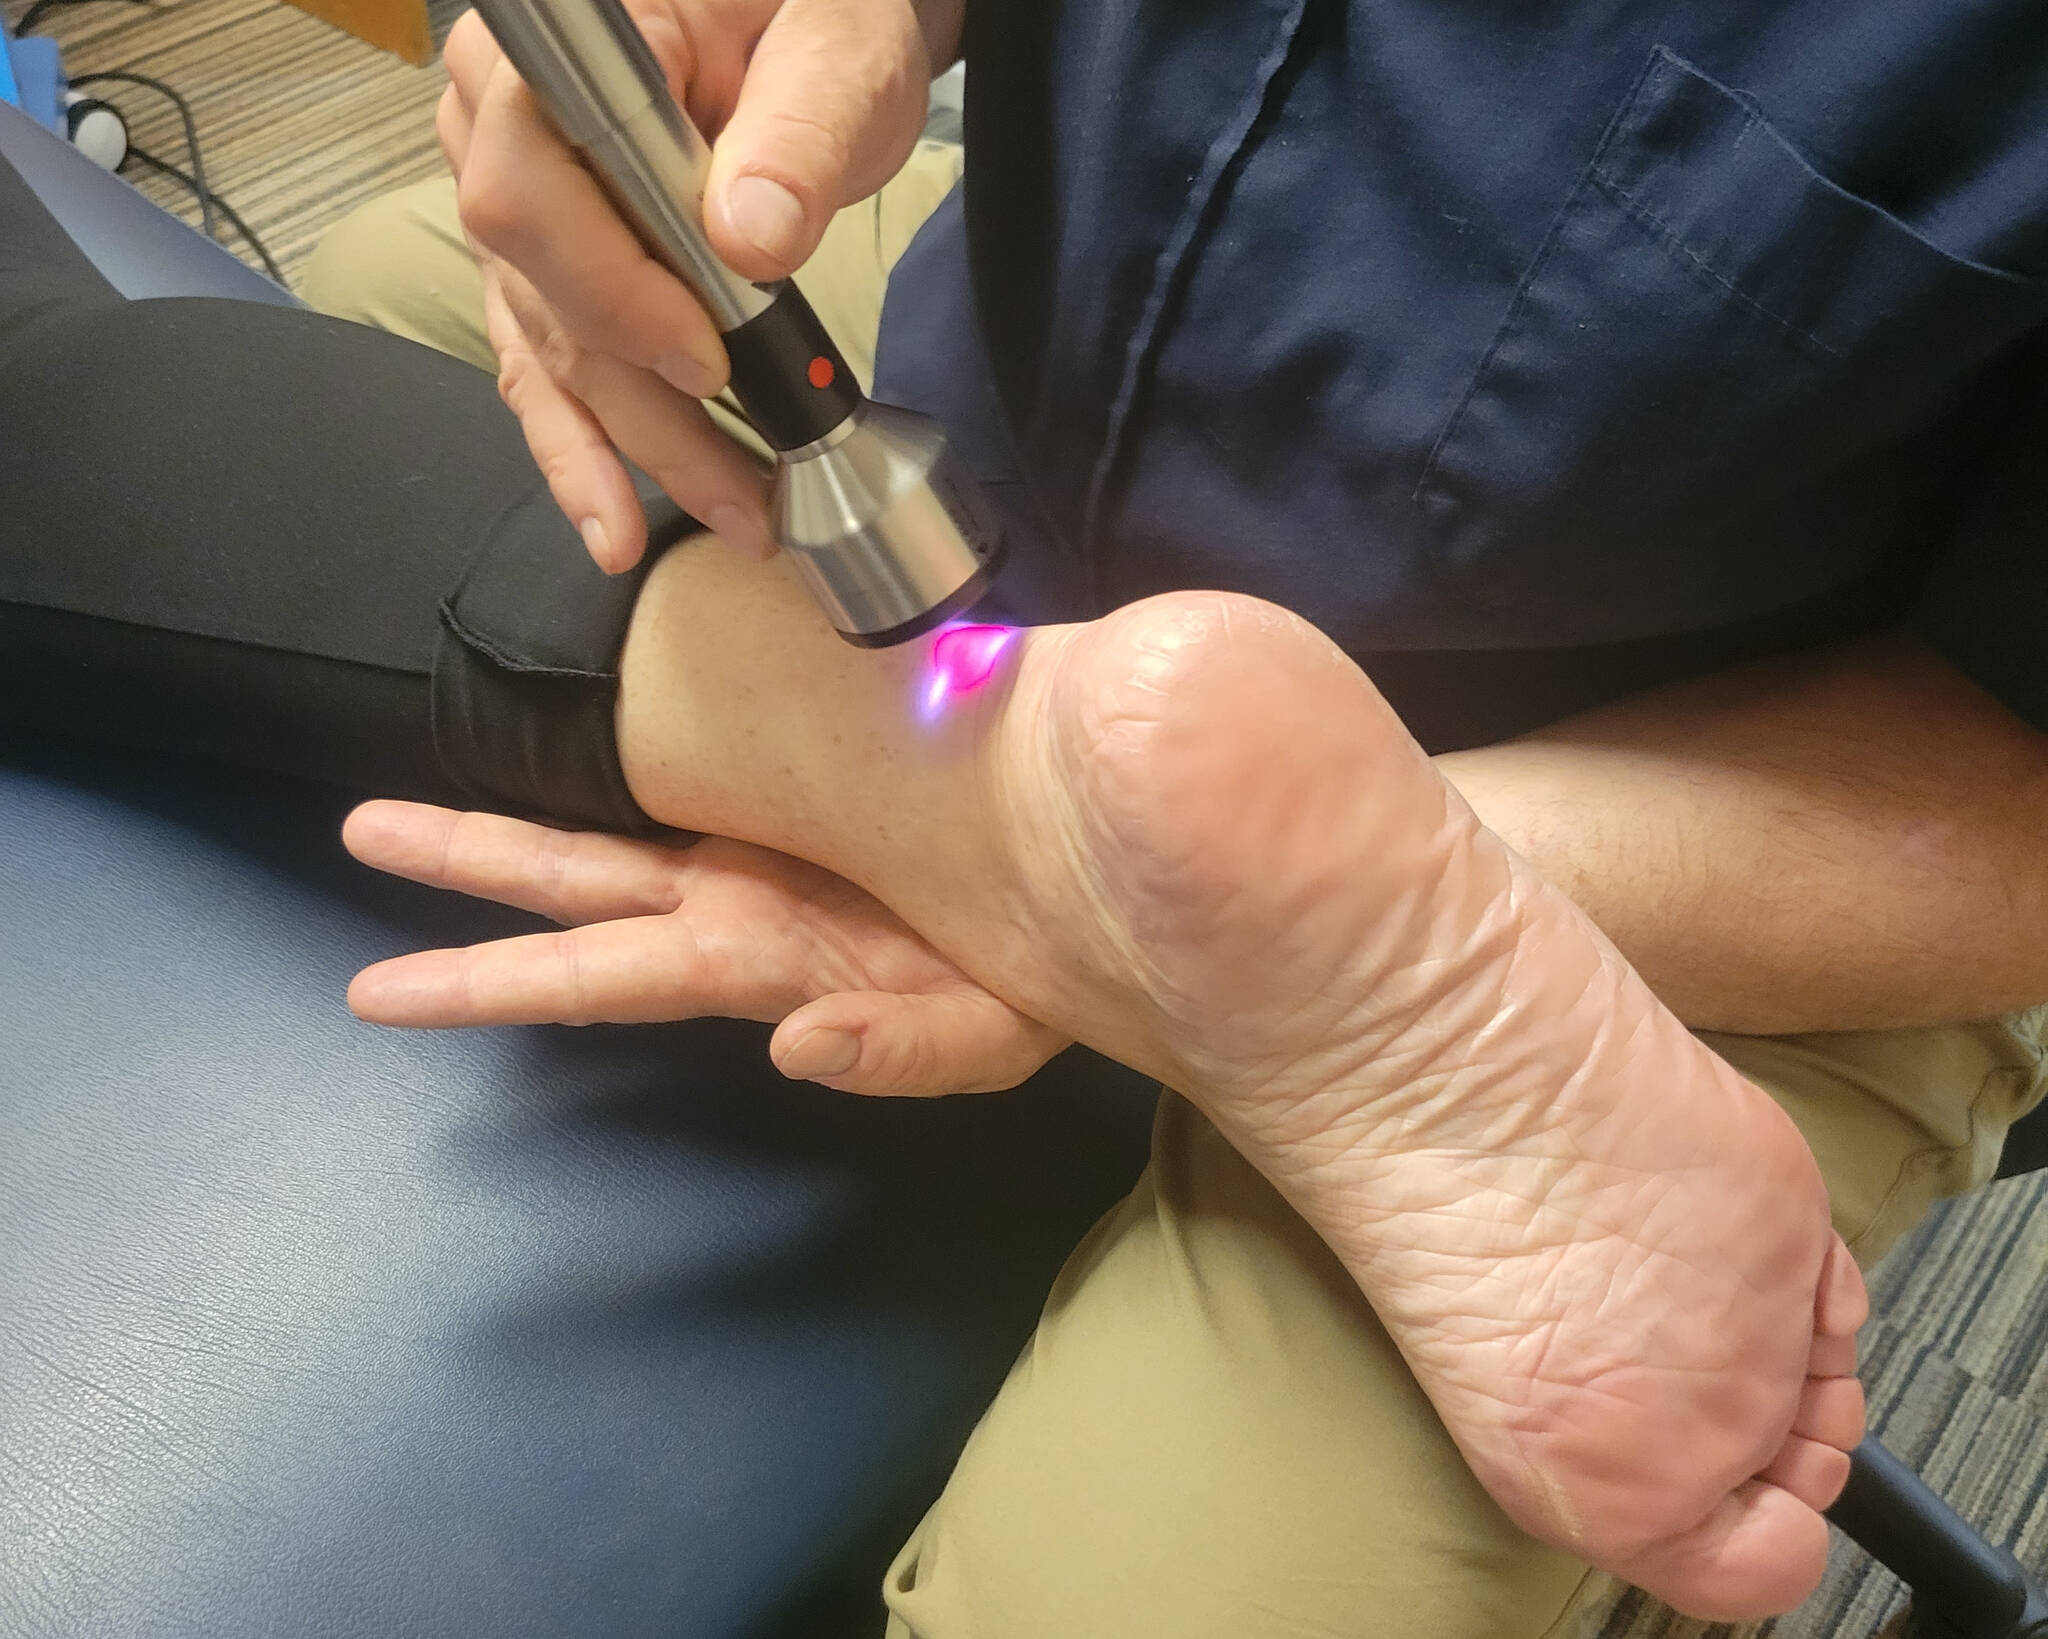 Cold Laser Therapy to reduce inflammation.